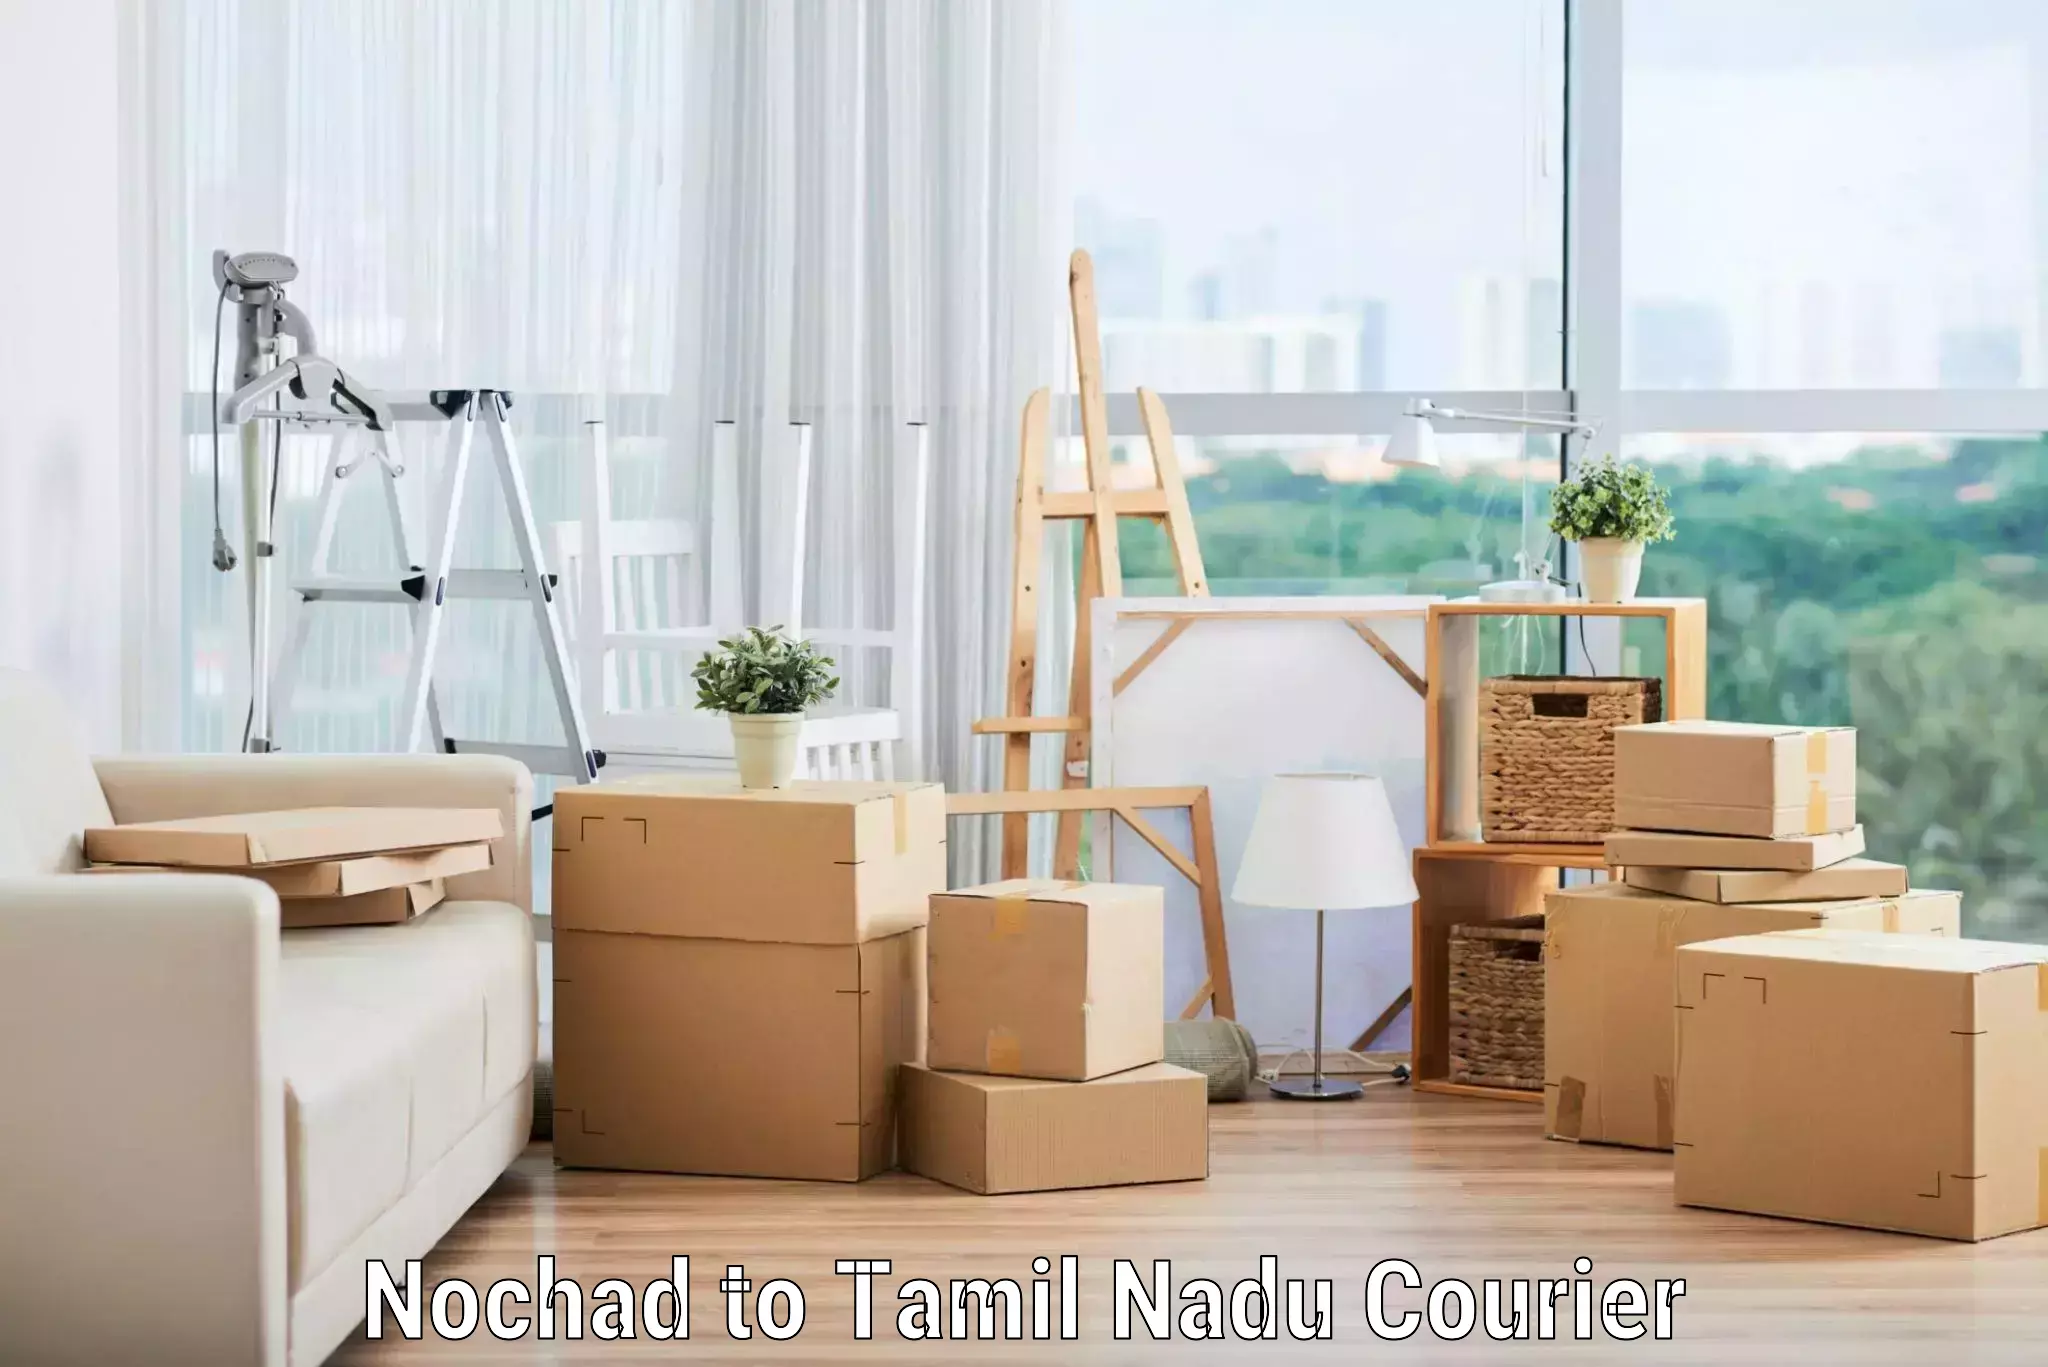 Furniture delivery service Nochad to Sirkali